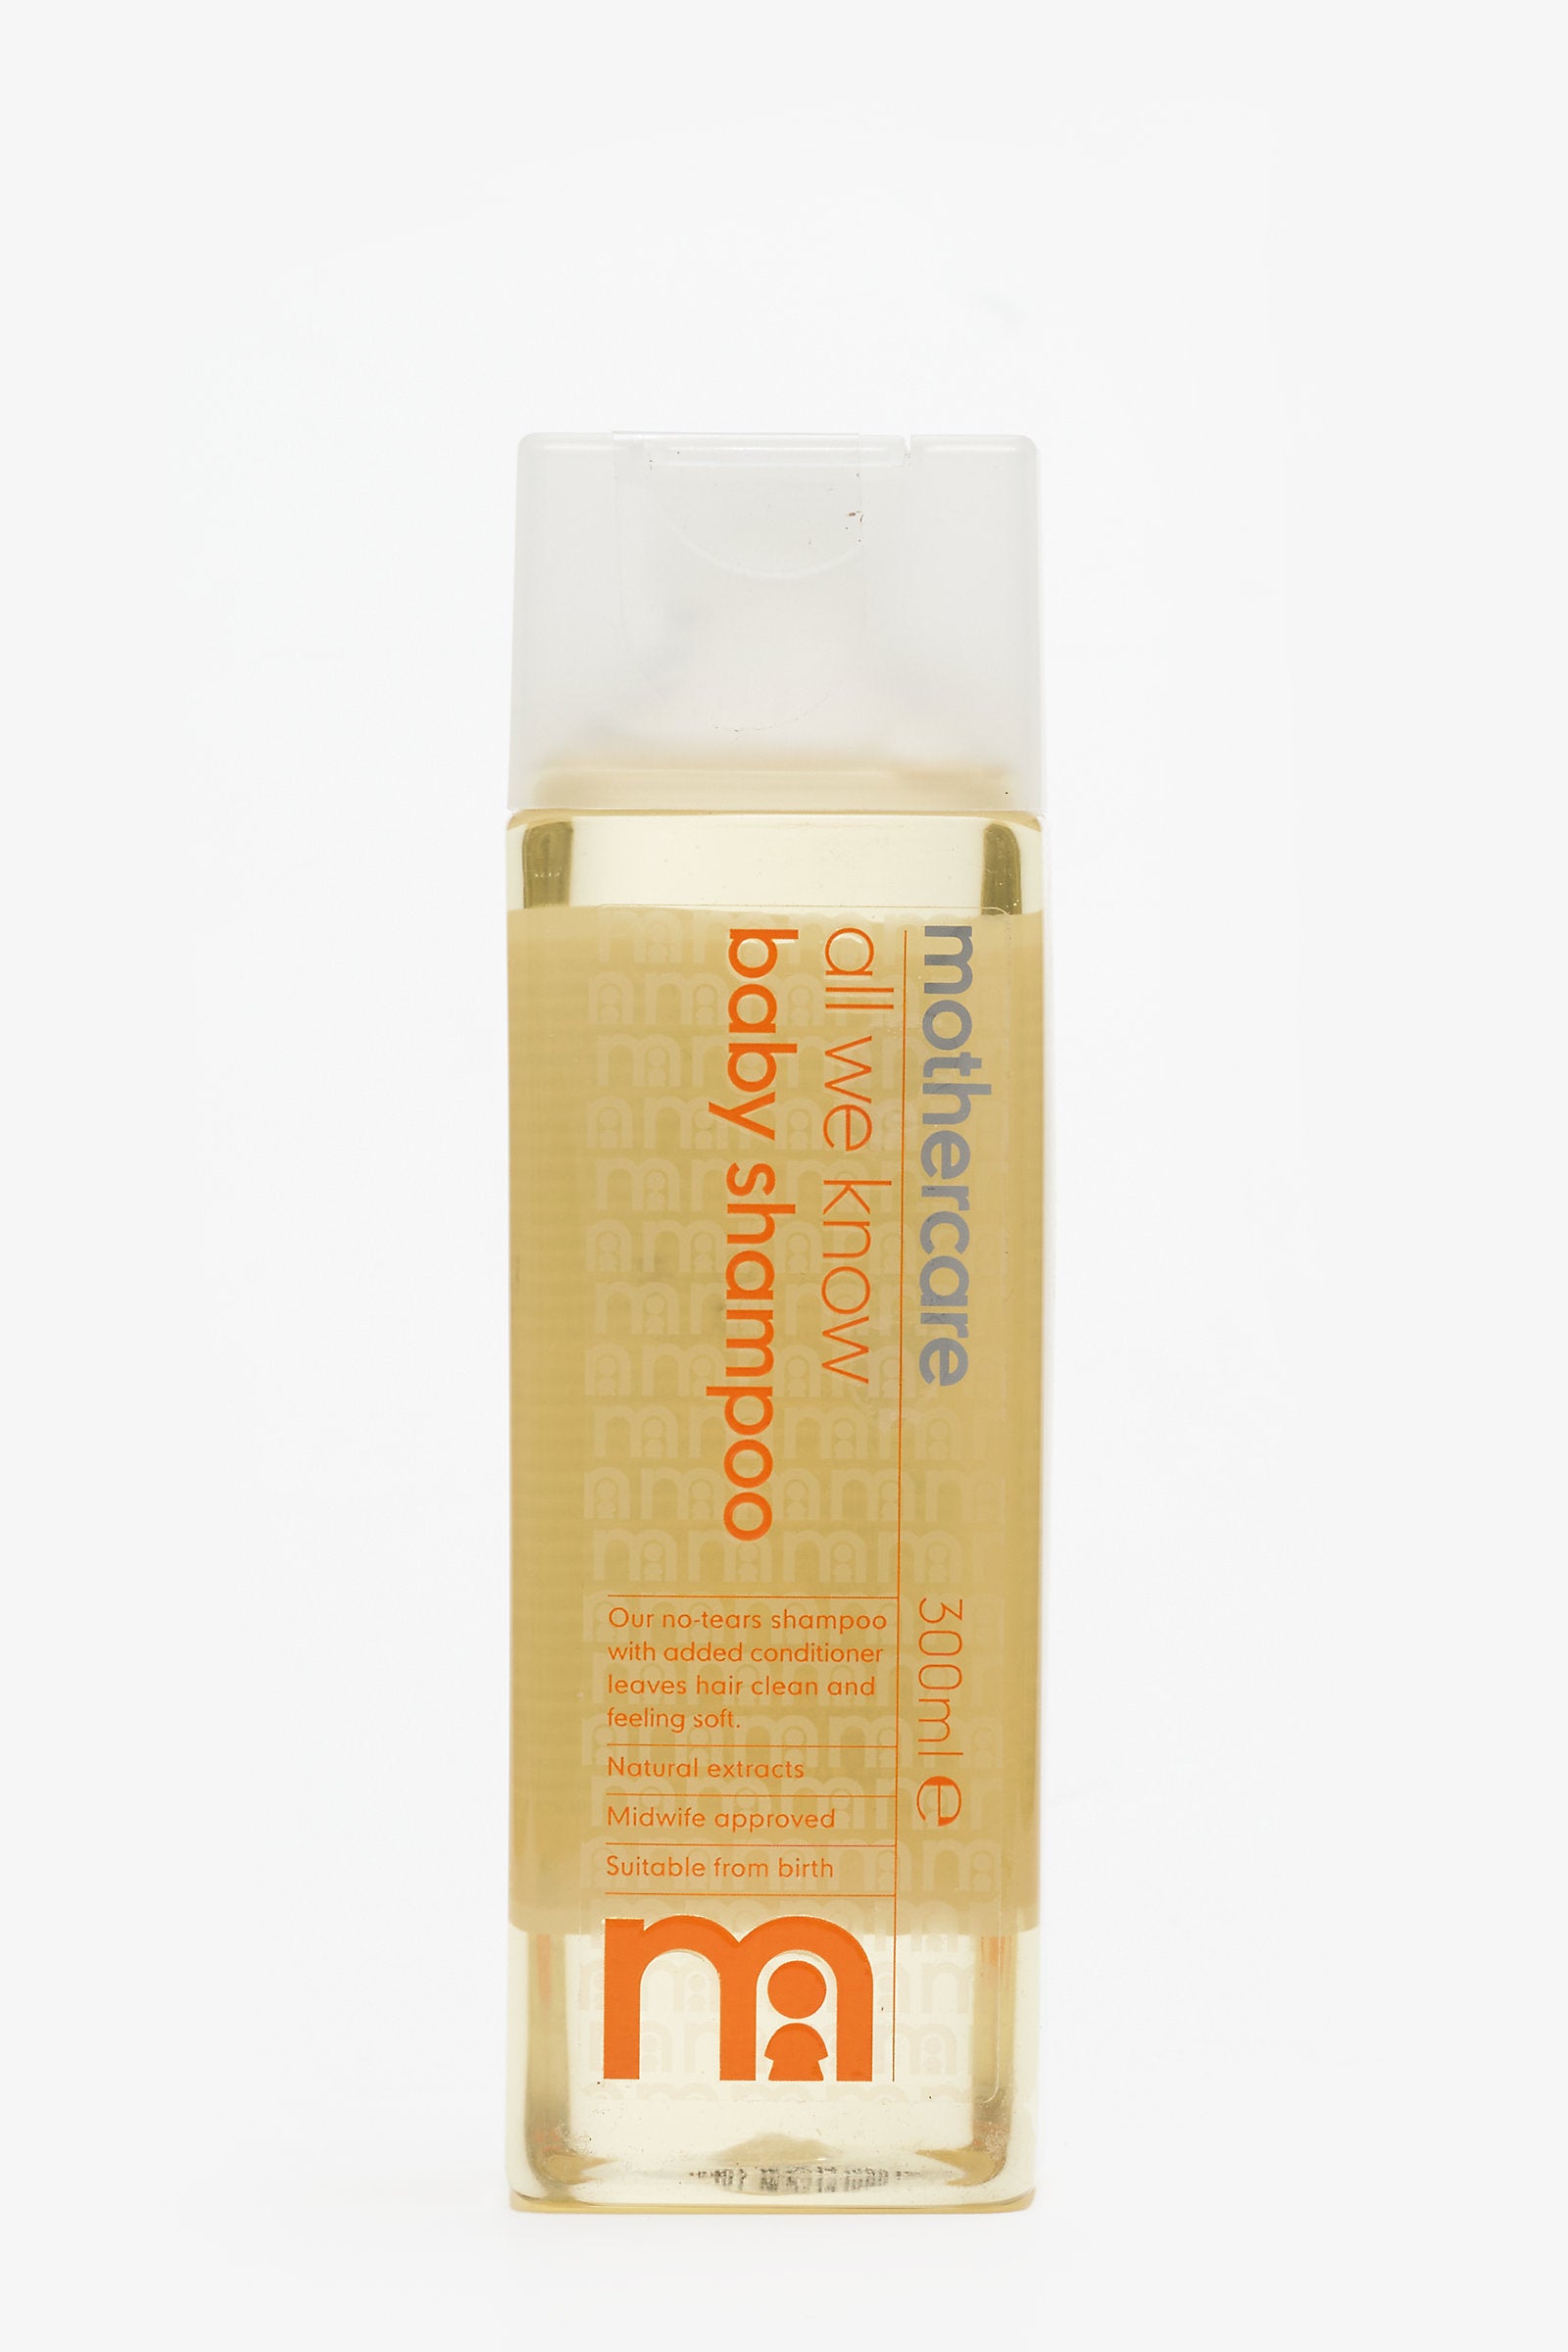 Mothercare All We Know Baby Shampoo - 300ml